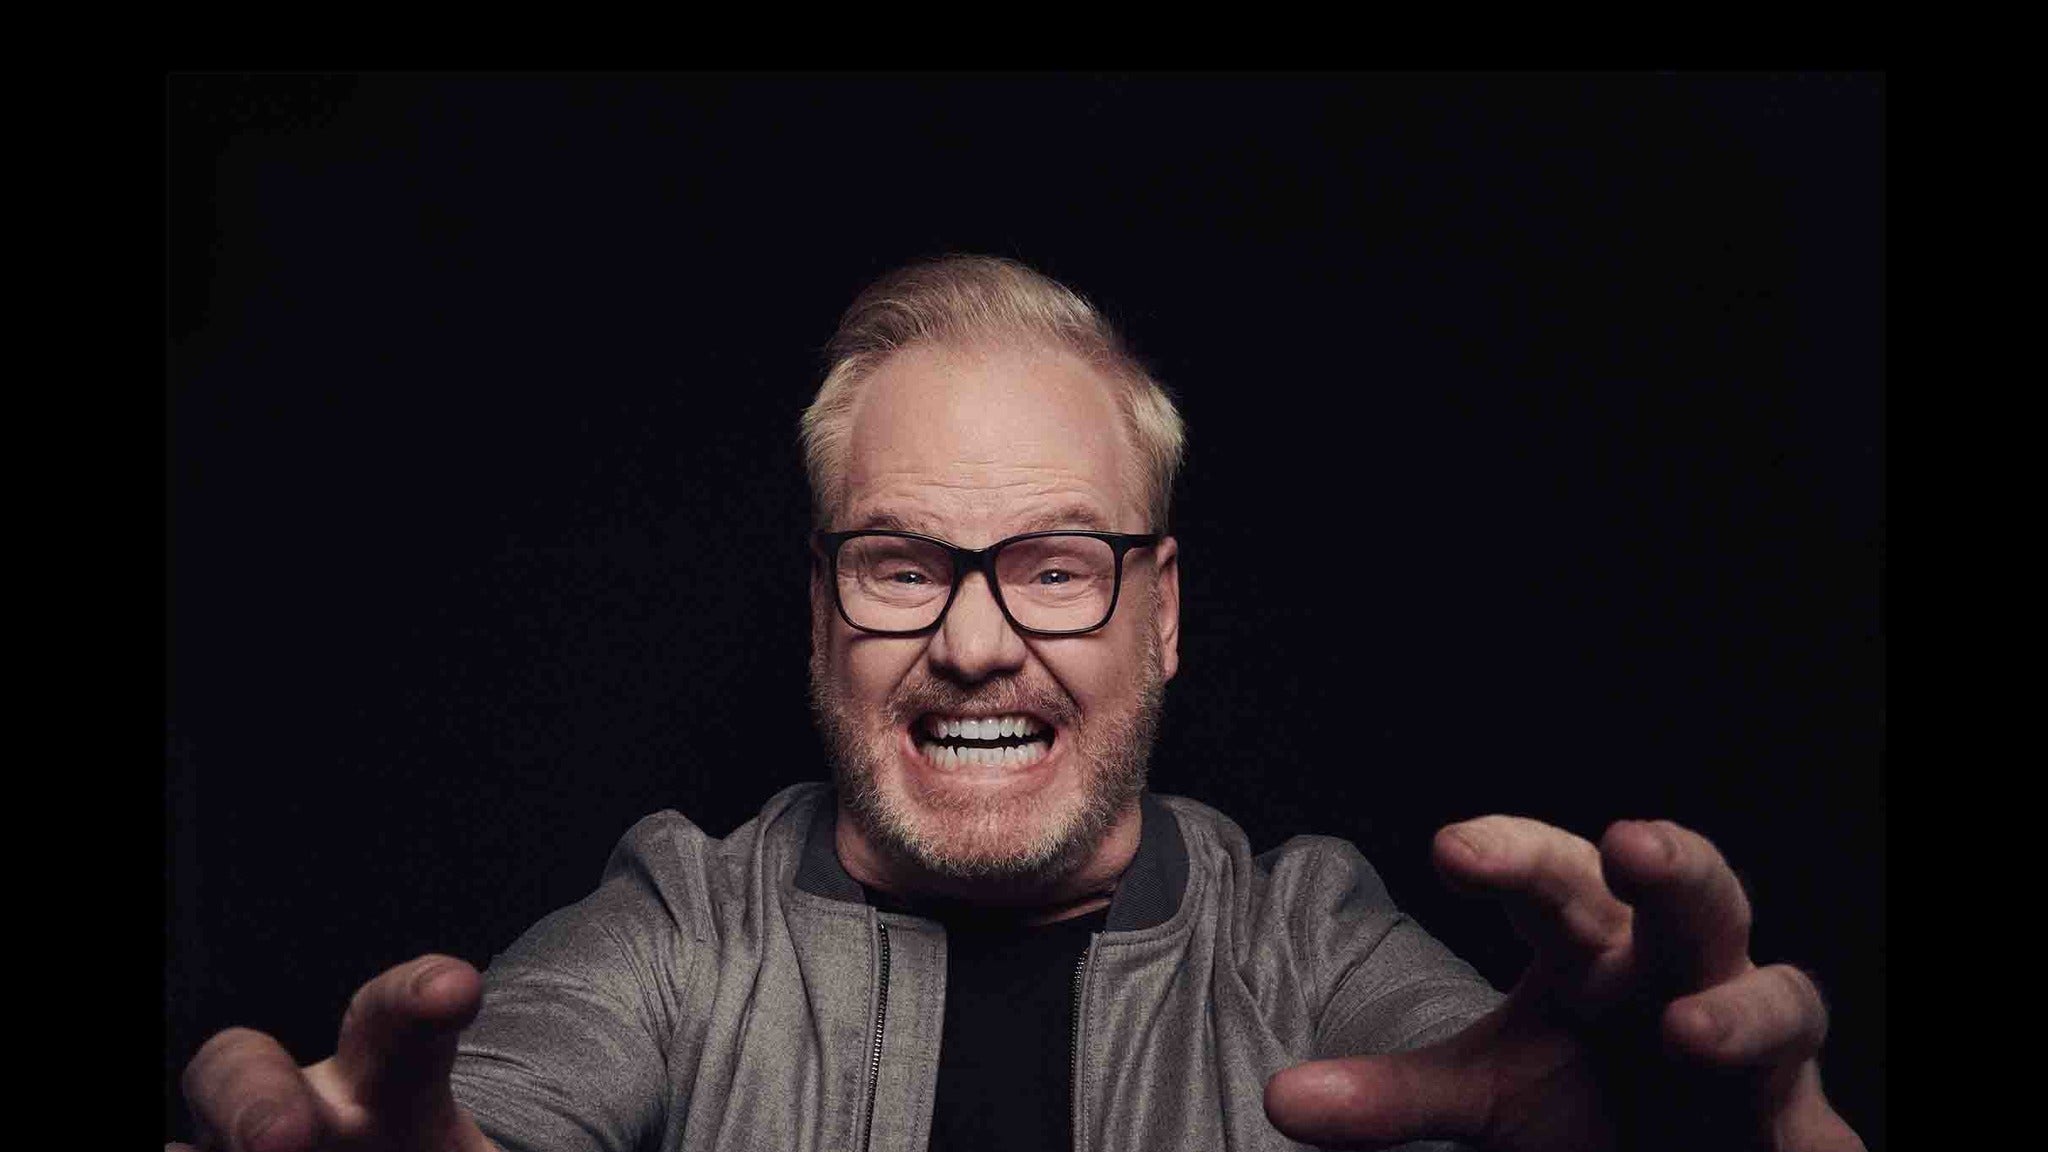 Jim Gaffigan: the Fun Tour! pre-sale password for early tickets in Hollywood